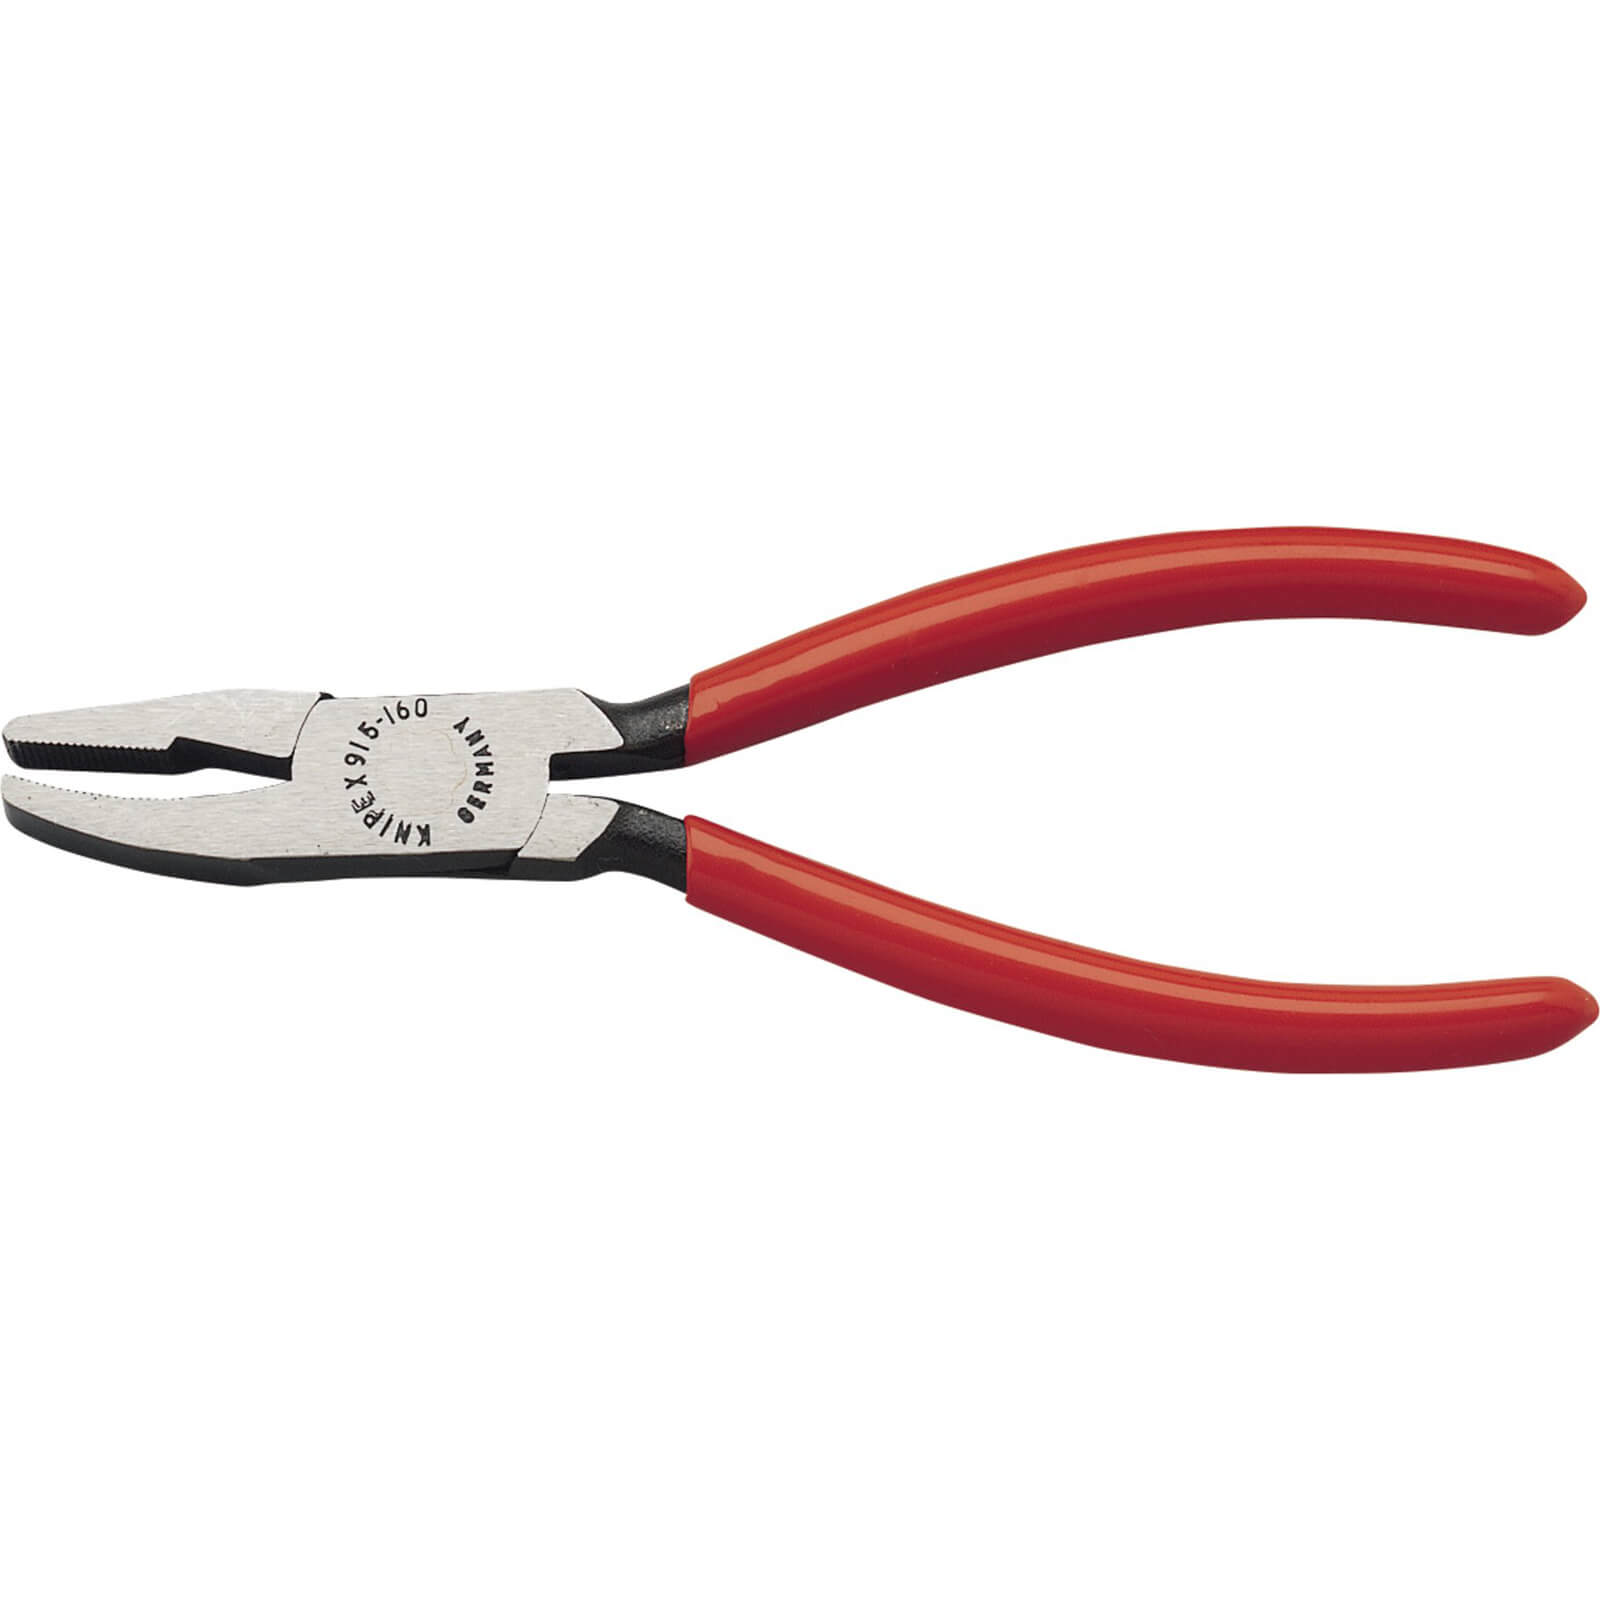 Image of Knipex Glass Nibbling Pincers 160mm